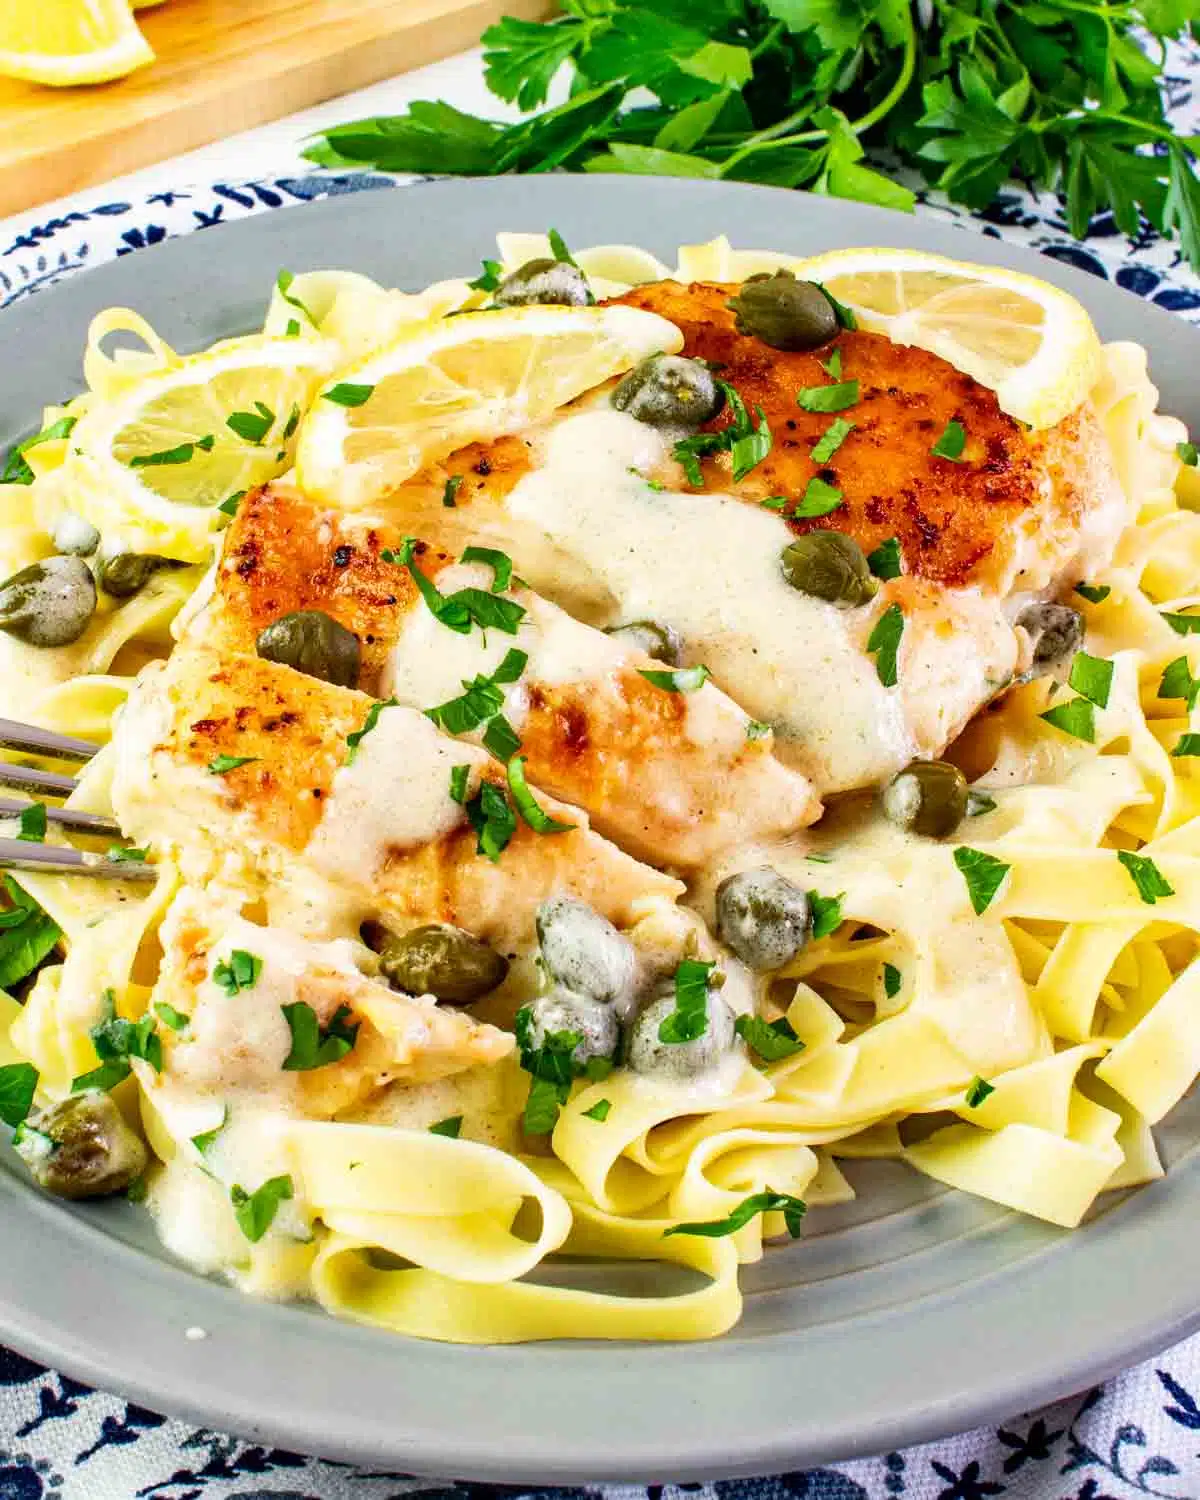 creamy chicken piccata on a bed of noodles.